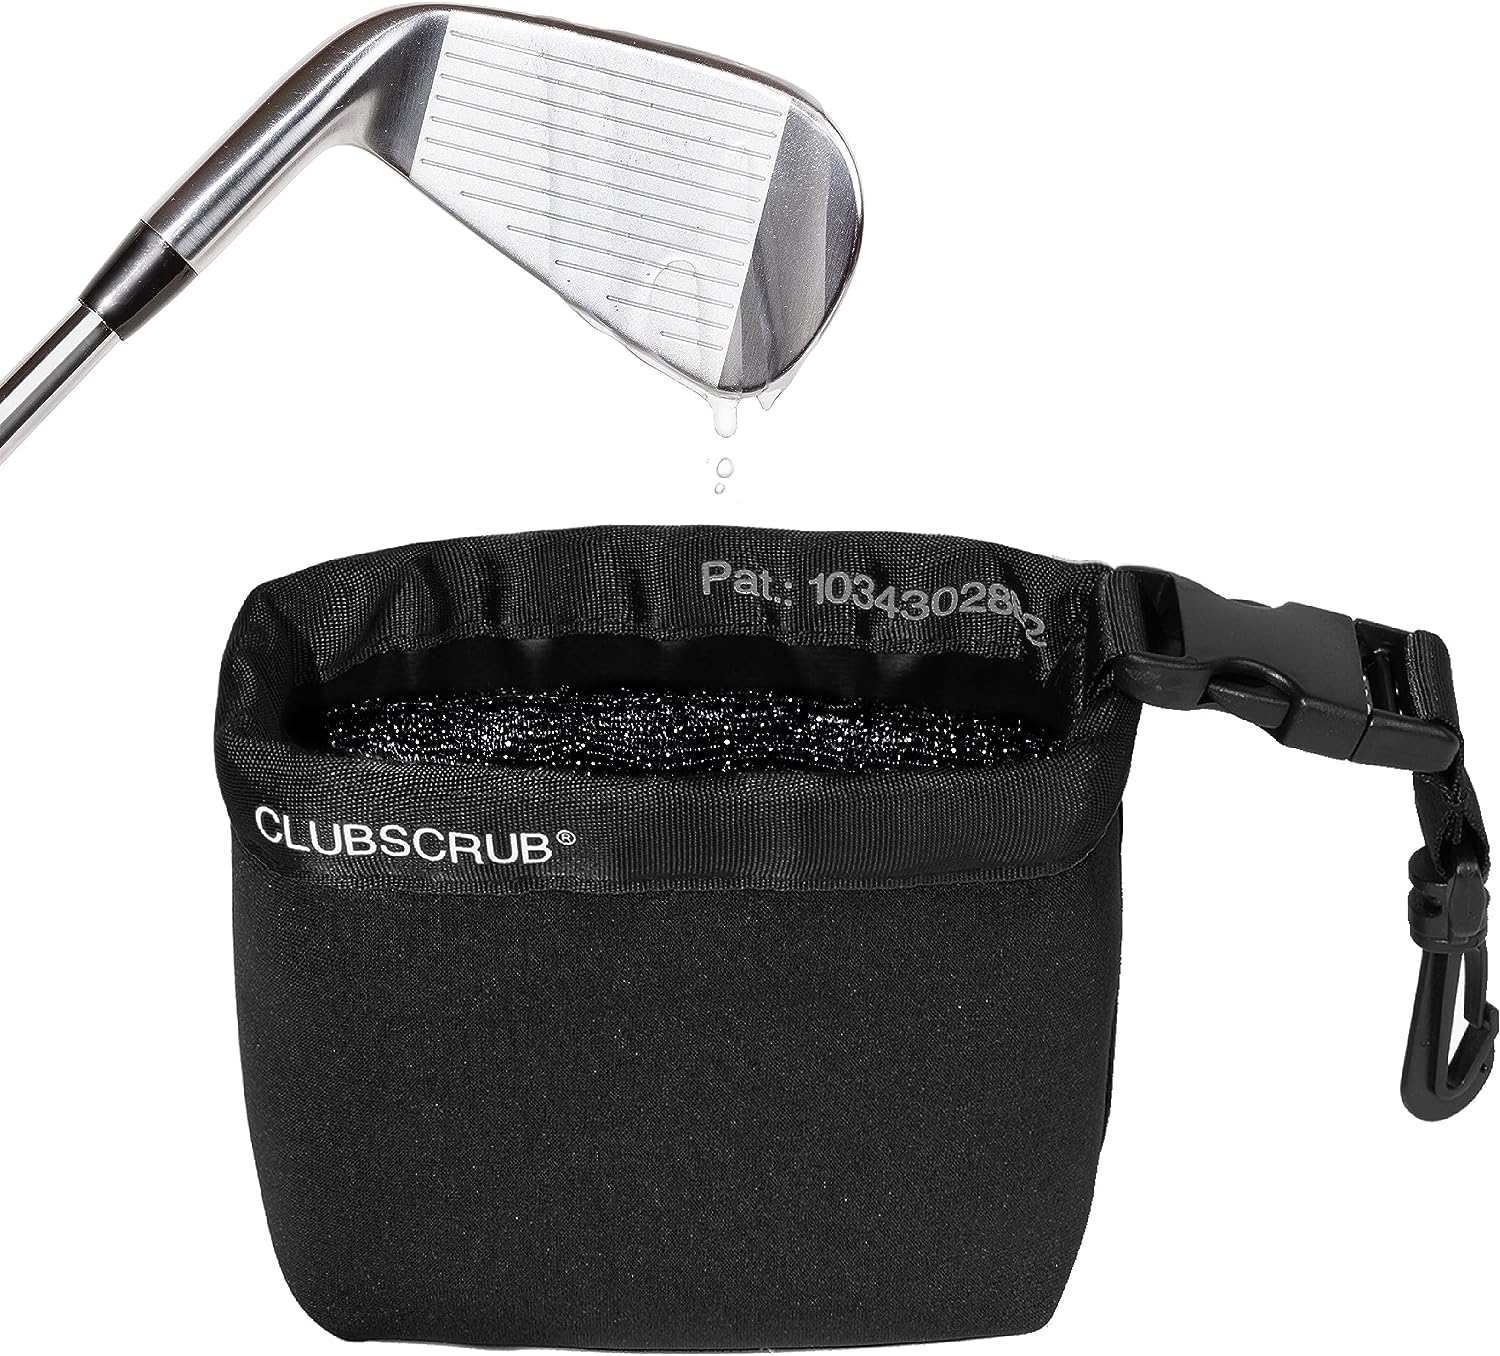 Club Scrub Golf Club and Golf Ball Cleaning Bag, Waterproof Clean Face Technology Liner, Perfectly Dry Neoprene Exterior, Detachable Clip, Machine Washable, Cleans Club Grooves, Black